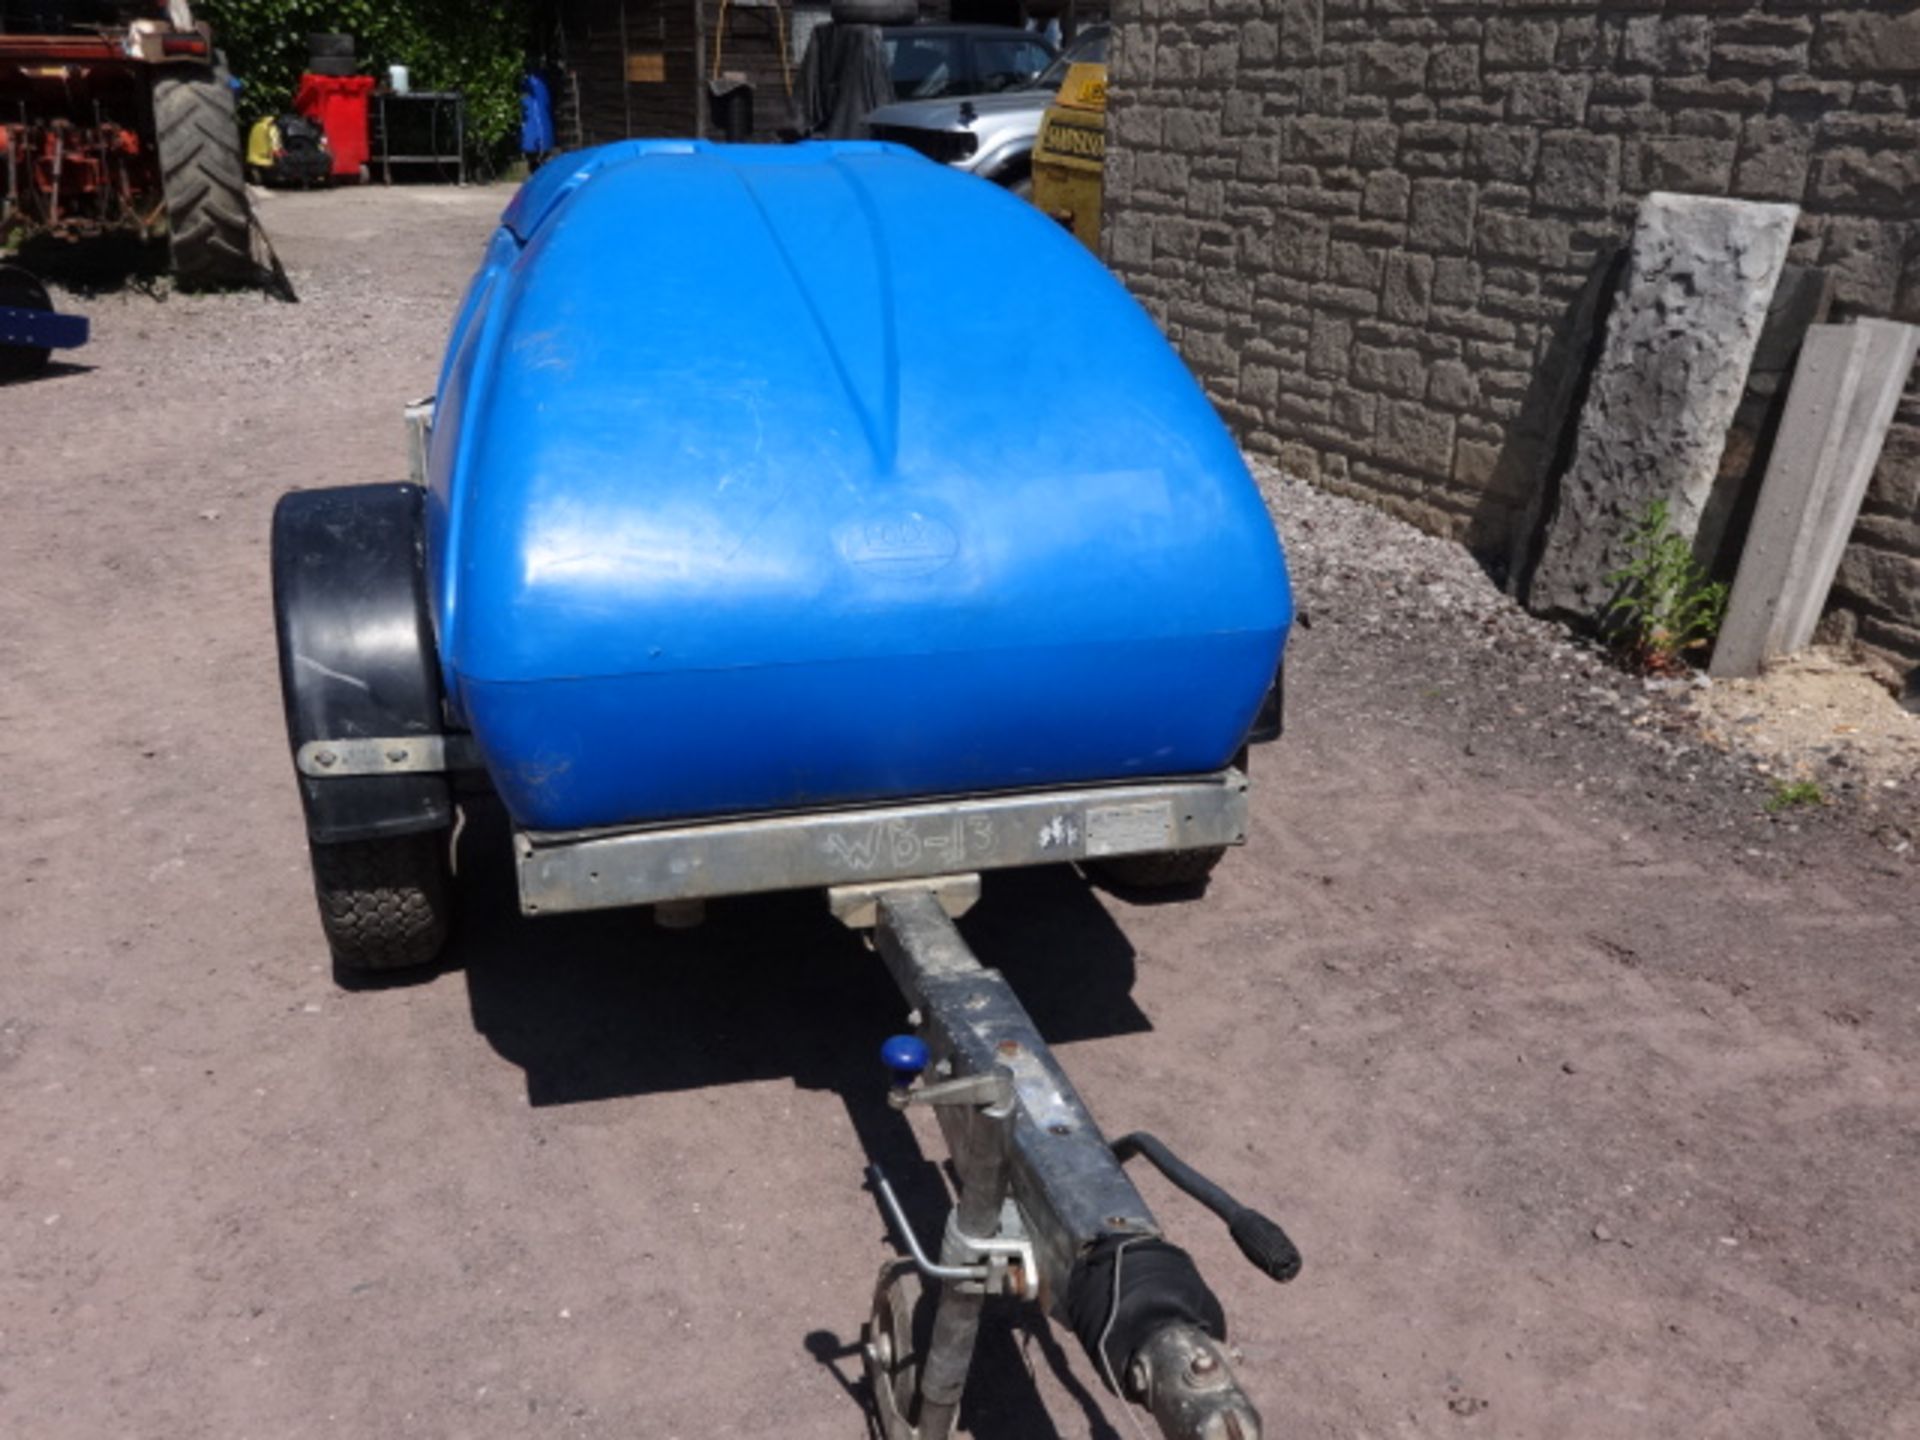 Western Towable Water Bowser 1000ltr - Image 2 of 3